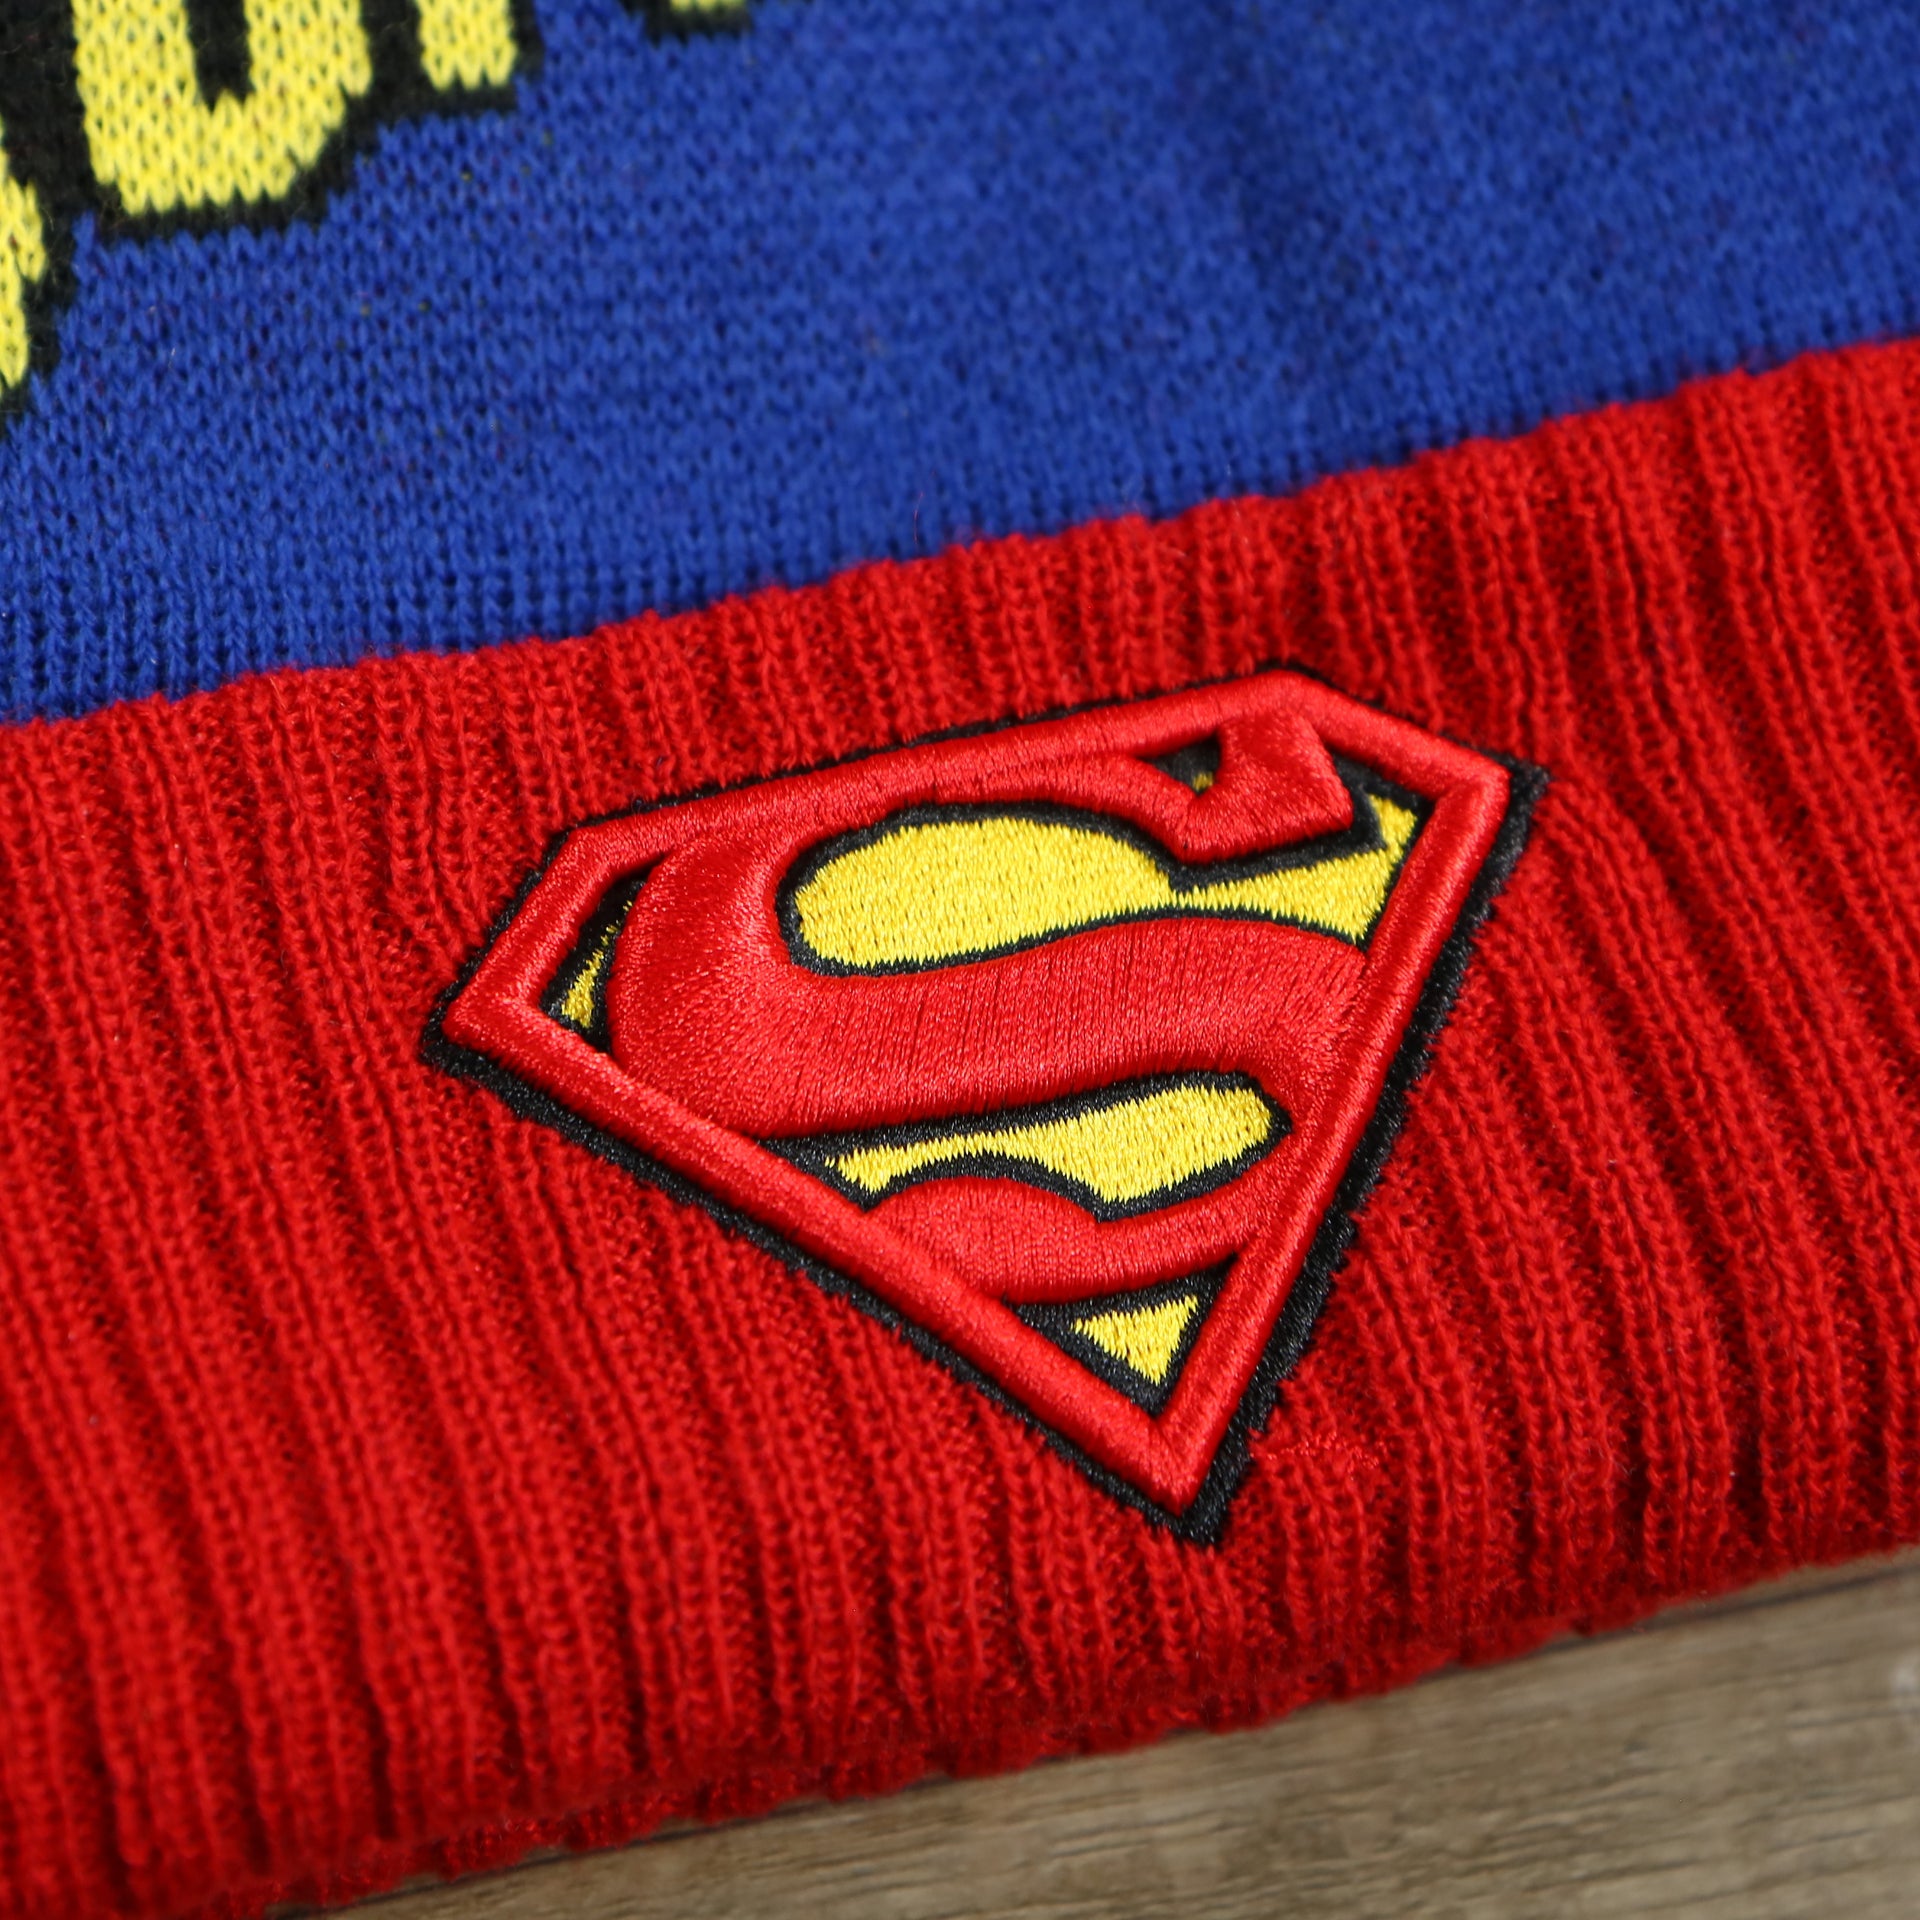 The Superman Logo on the DC Comics Superman S-Shield Logo Superman Wordmark Striped Beanie With Blue Pom Pom | Blue And Red Winter Beanie